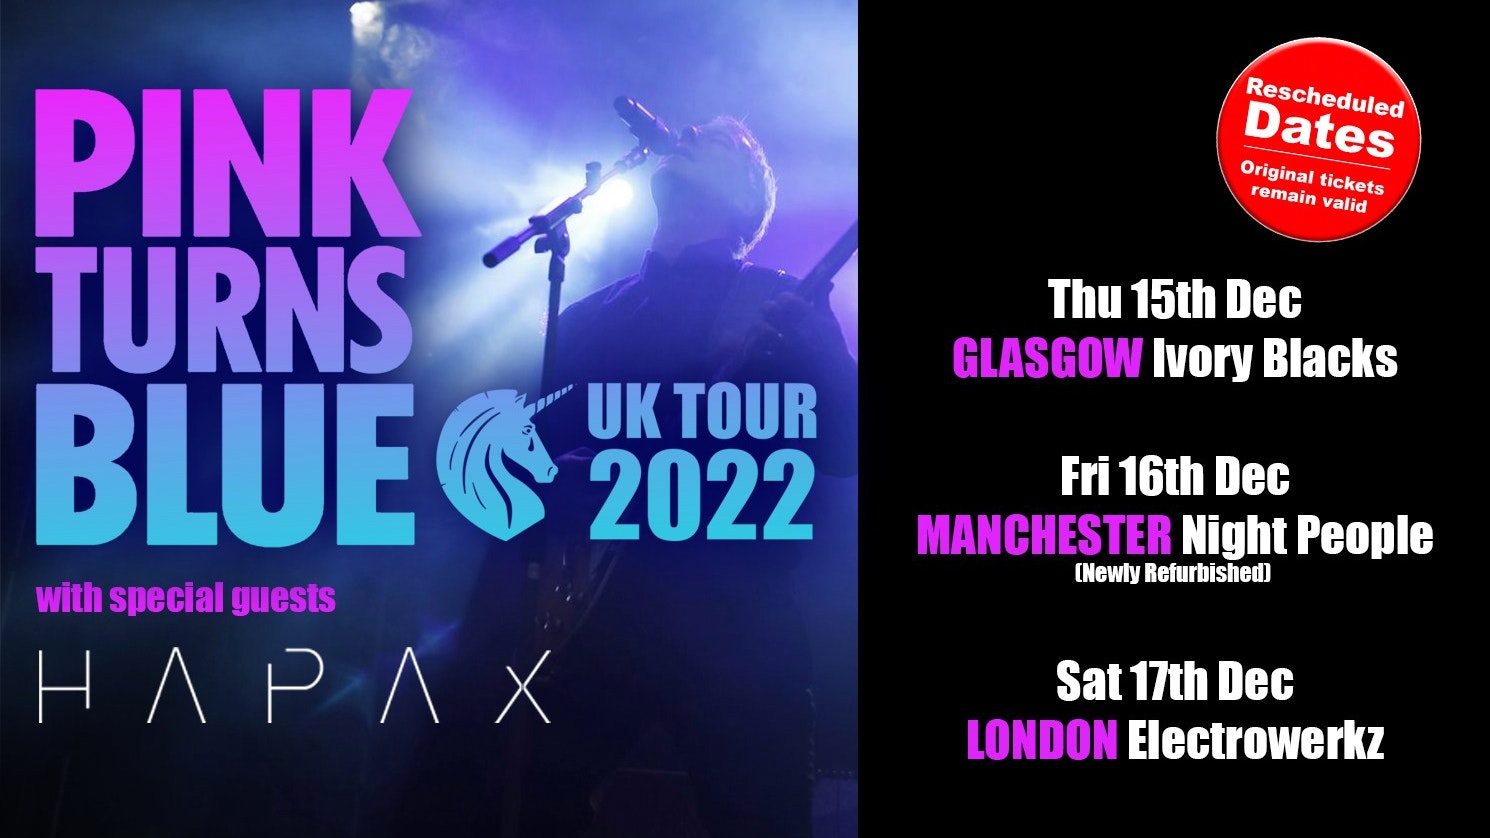 PINK TURNS  BLUE – NEW DATE GLASGOW + Special guests HAPAX